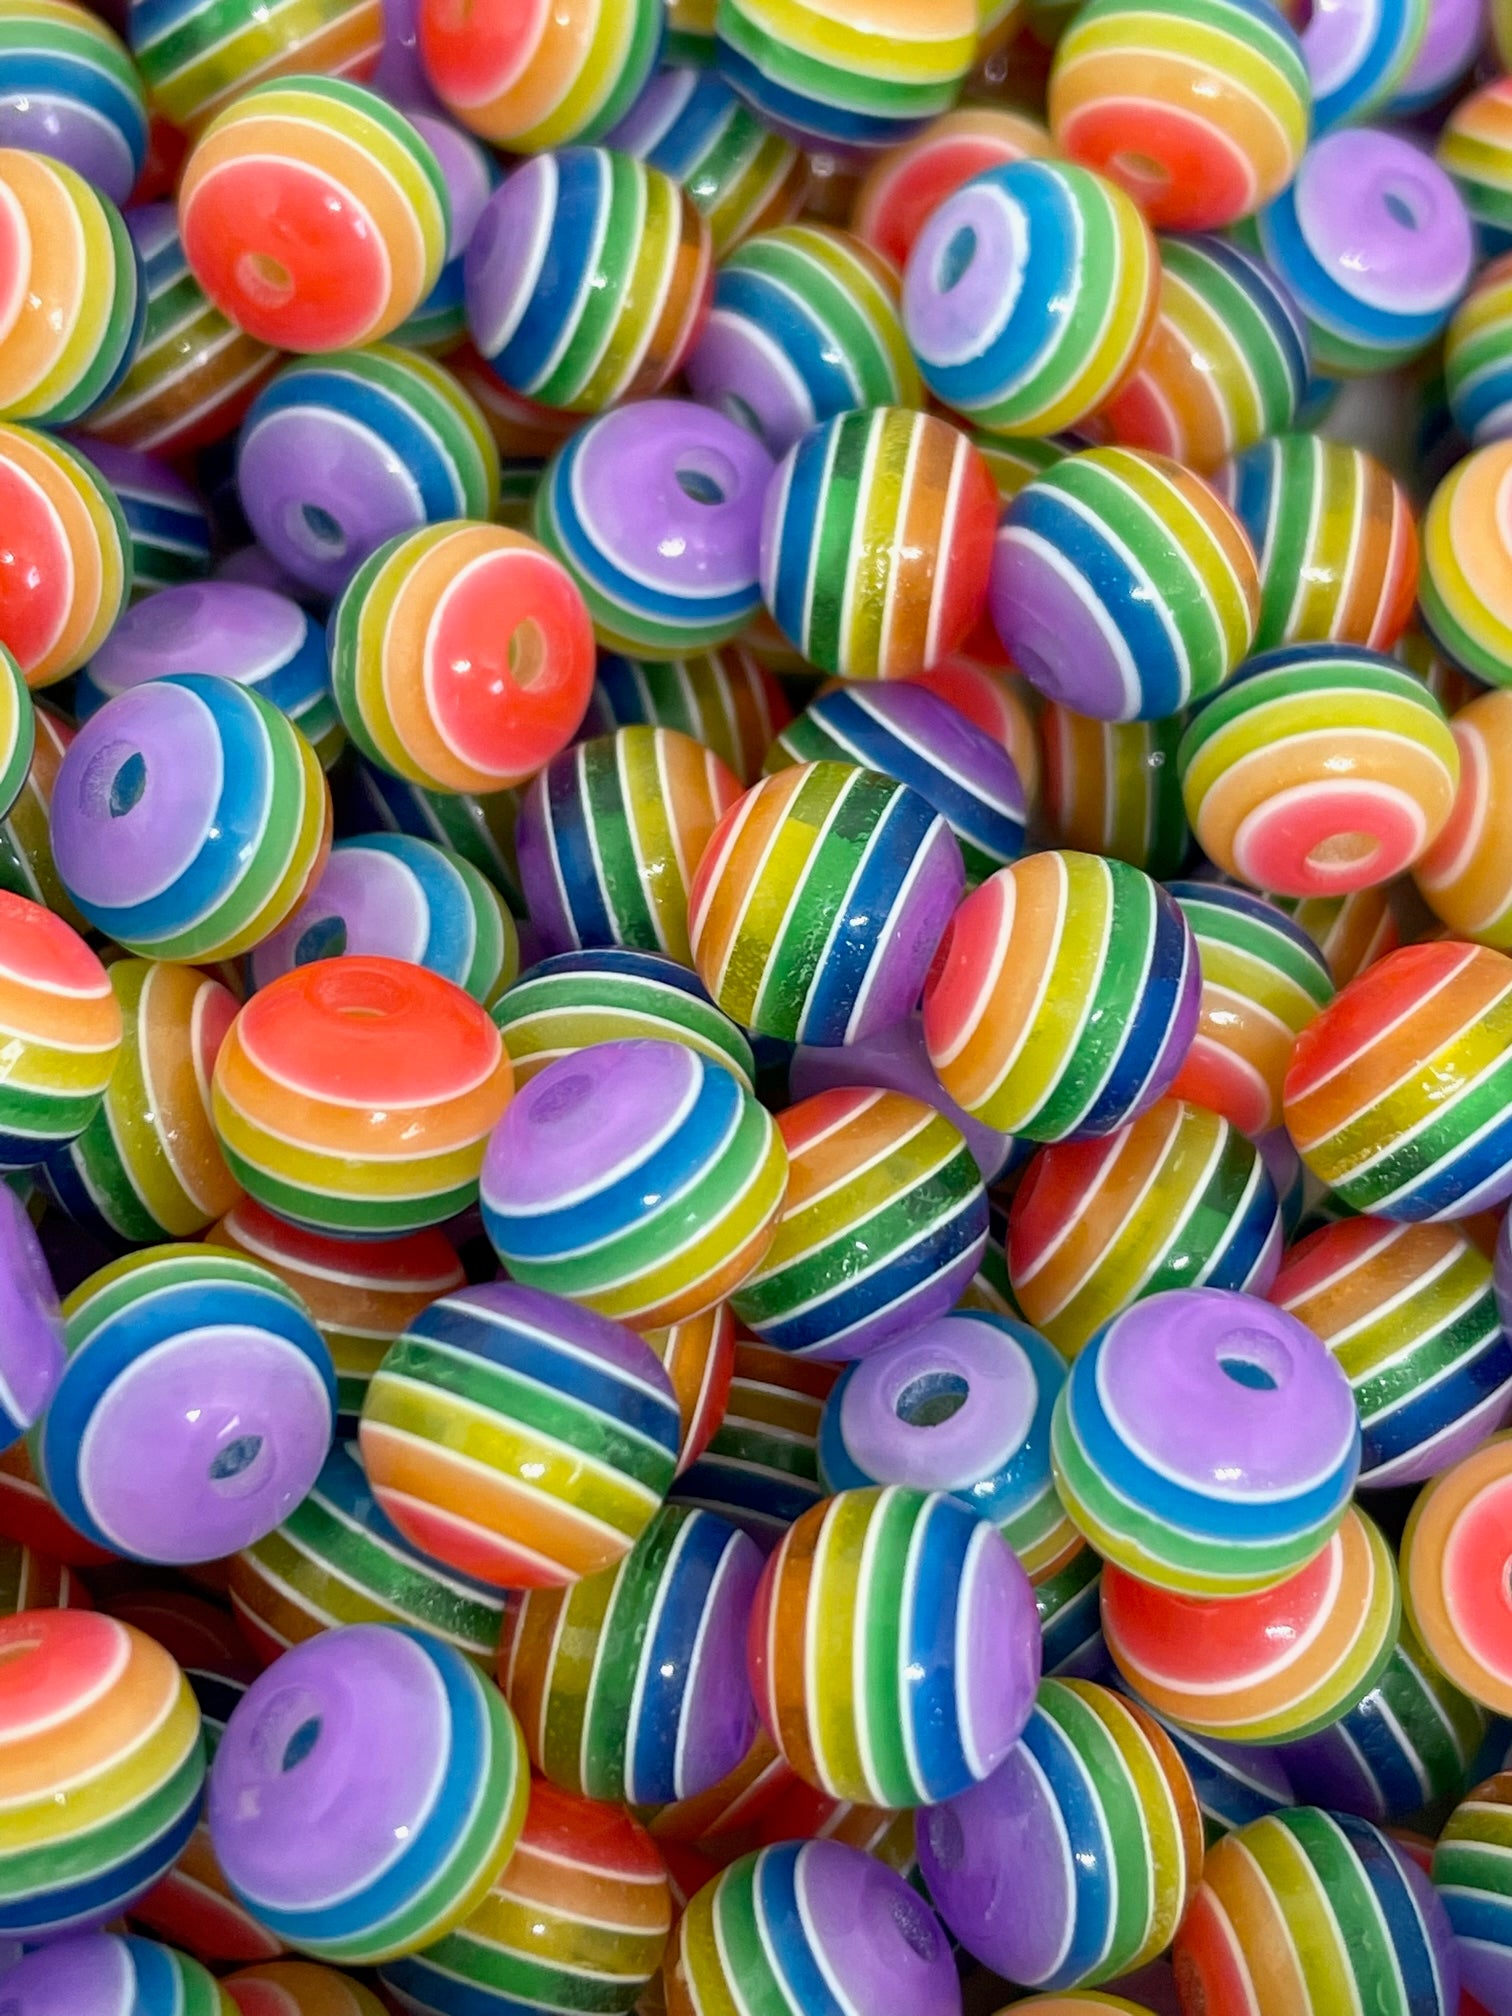 Celebrate Pride with Rainbow Striped Resin Beads Jewelry from Madison Beads